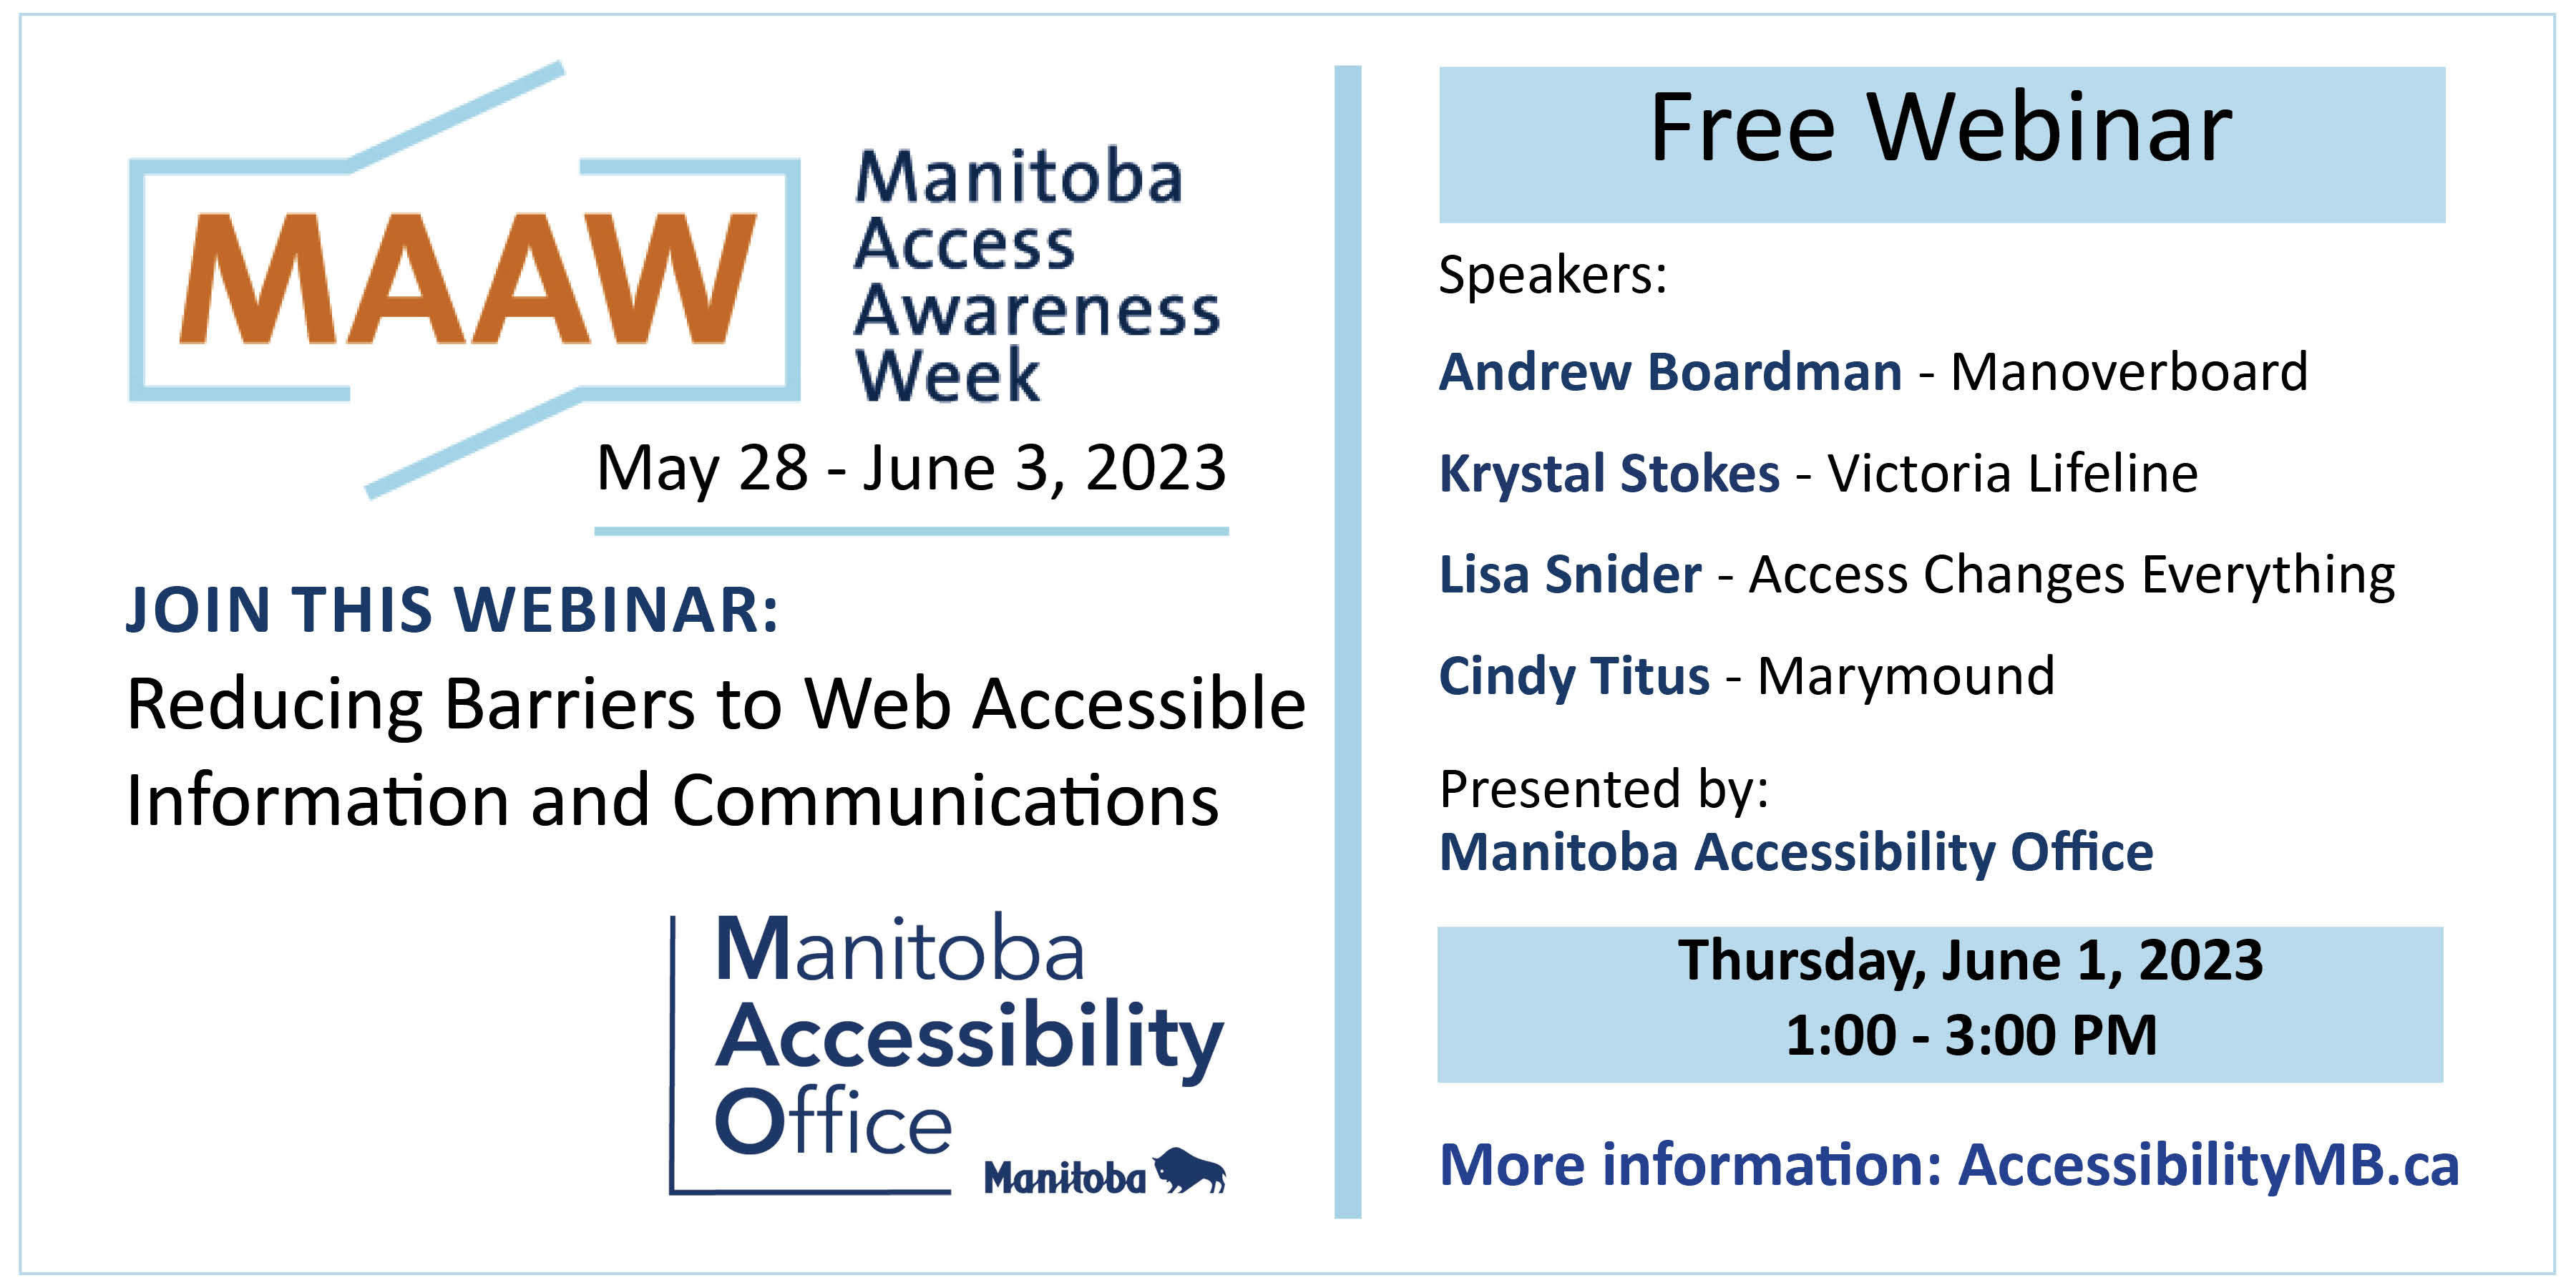 Manitoba Access Awareness Week Join this Free webinar Reducing Barriers to Web Accessible Information and Communications. Speakers Andrew Boardman from Manoverboard, Krystal Stokes from vicrotia lifeline, List Snider from Access changes everything, and Cindy Titus from Marymound. Presented by the Manitoba Accessibility Office on June 1st 2023 at 1:00pm - 3:00pm